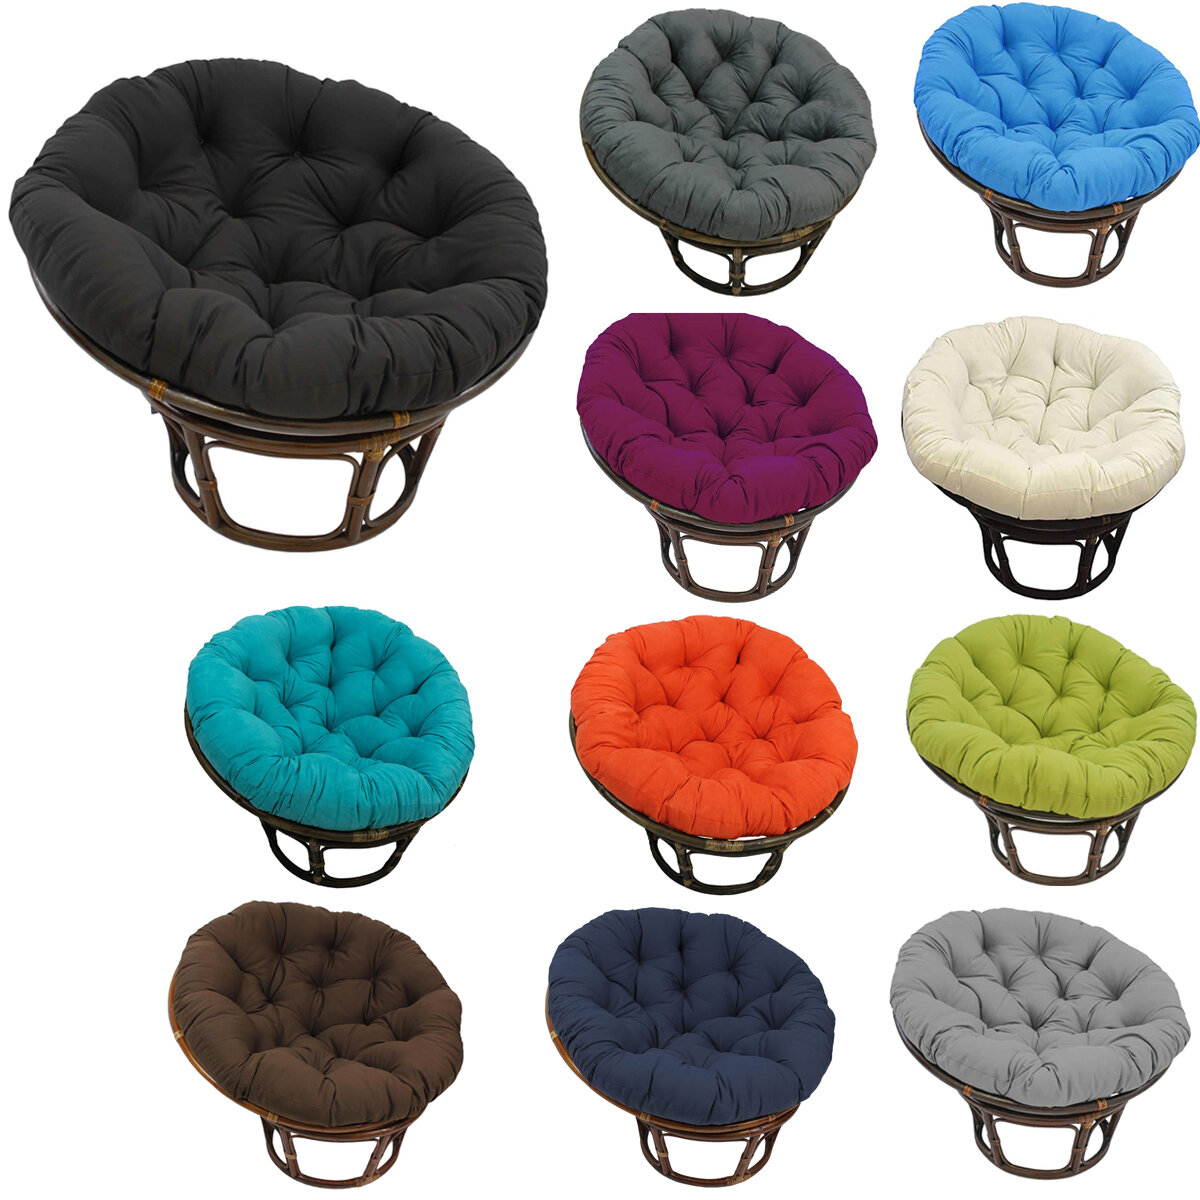 Image of Single Sofa Cushion Hanging Chair Cushion Thick Polyester Soft Indoor Outdoor Cradle Chair Cushion